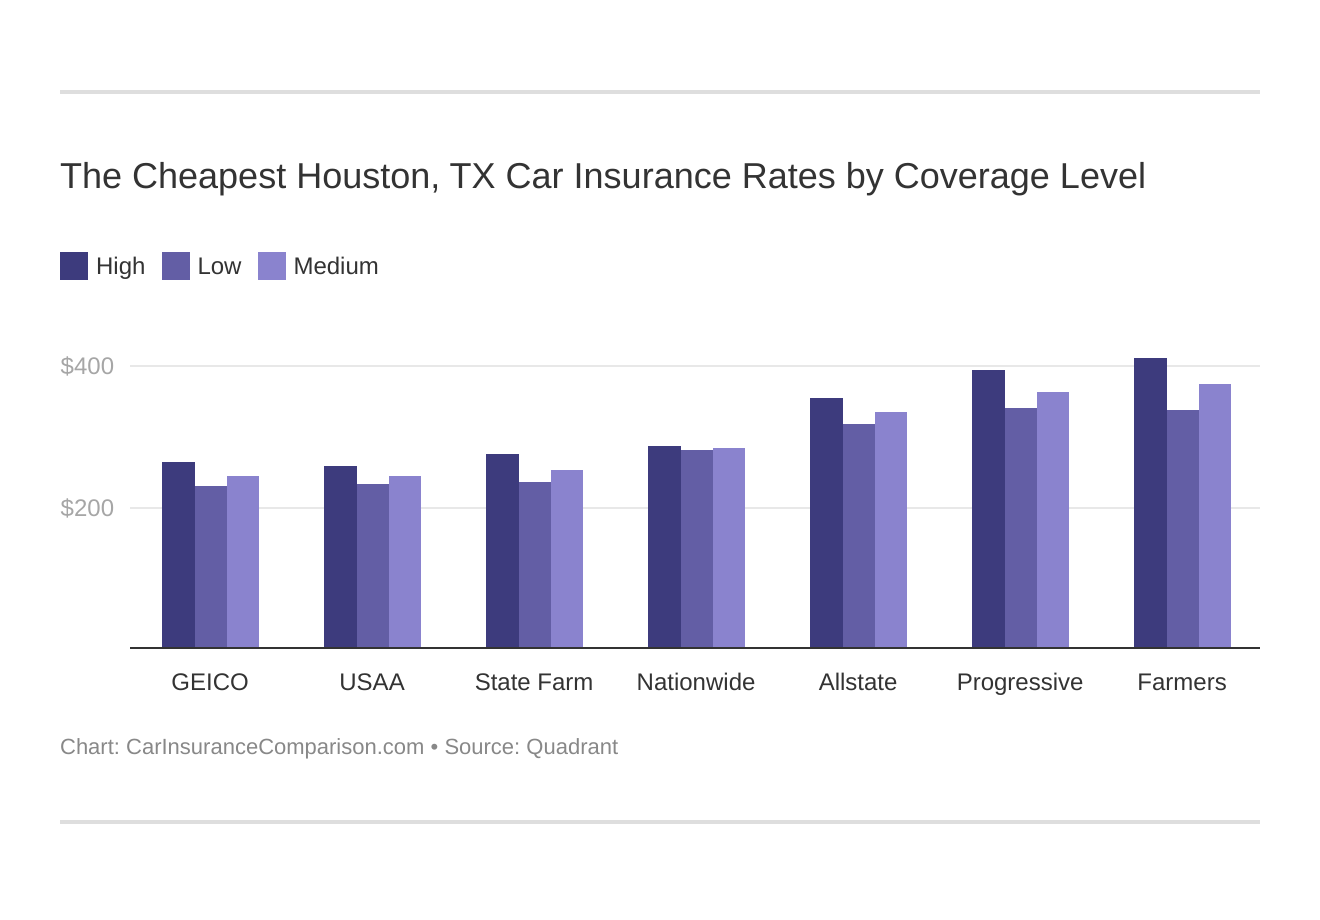 The Cheapest Houston, TX Car Insurance Rates by Coverage Level